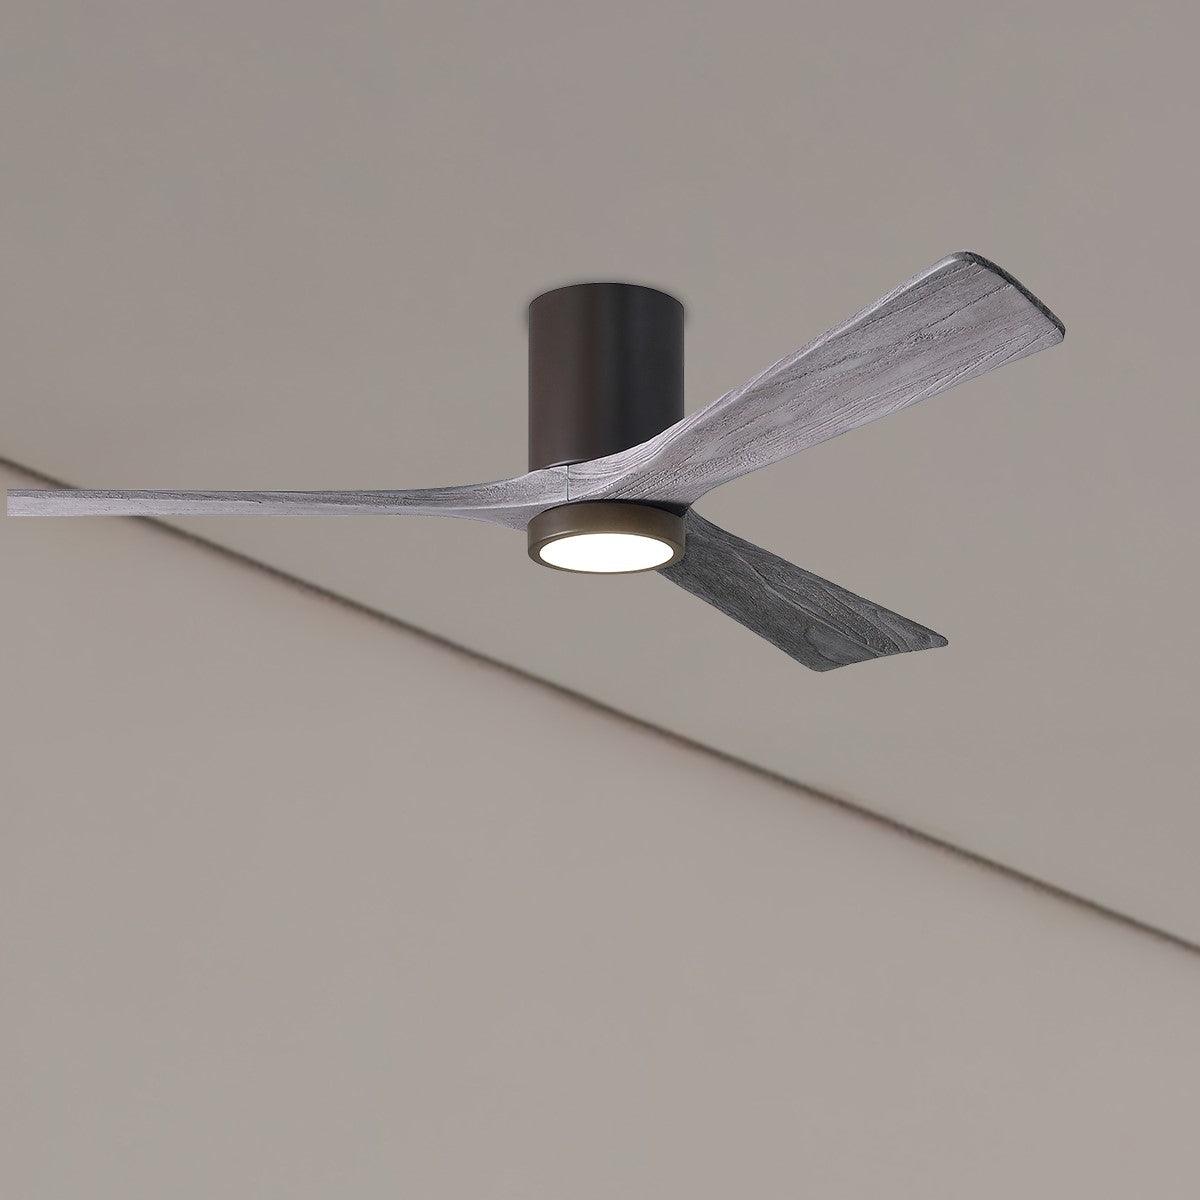 Irene 60 Inch Low Profile Outdoor Ceiling Fan With Light, Wall And Remote Control Included - Bees Lighting